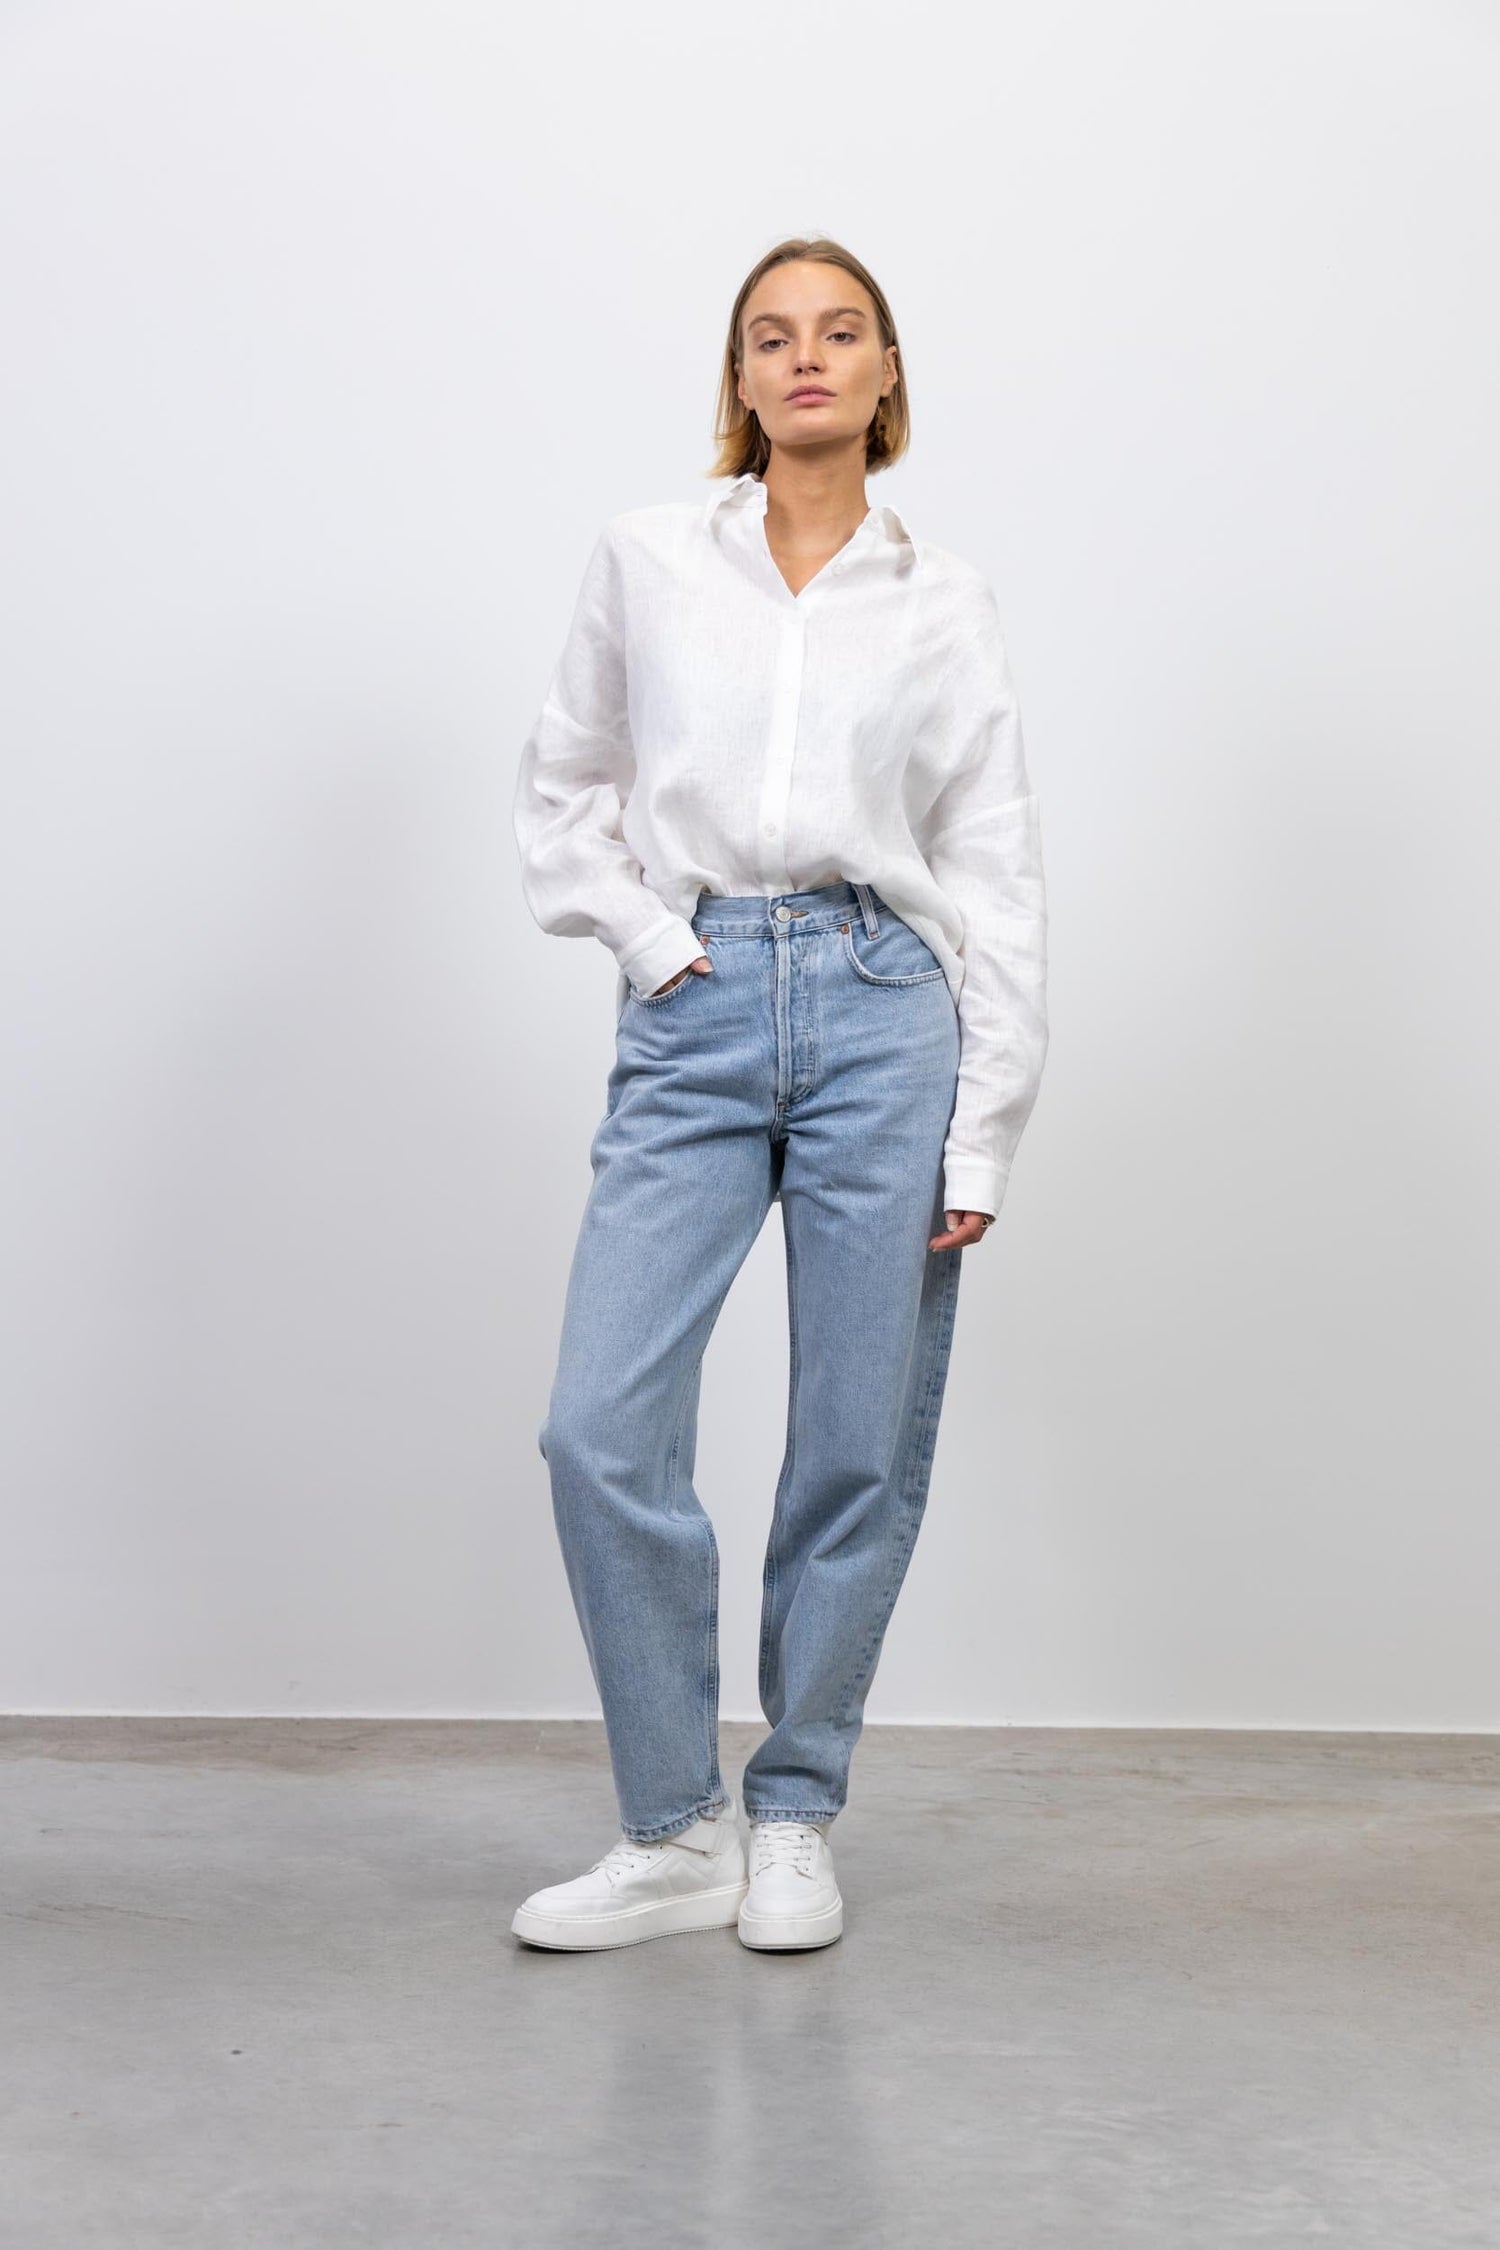 Aggregate more than 85 baggy jeans zara